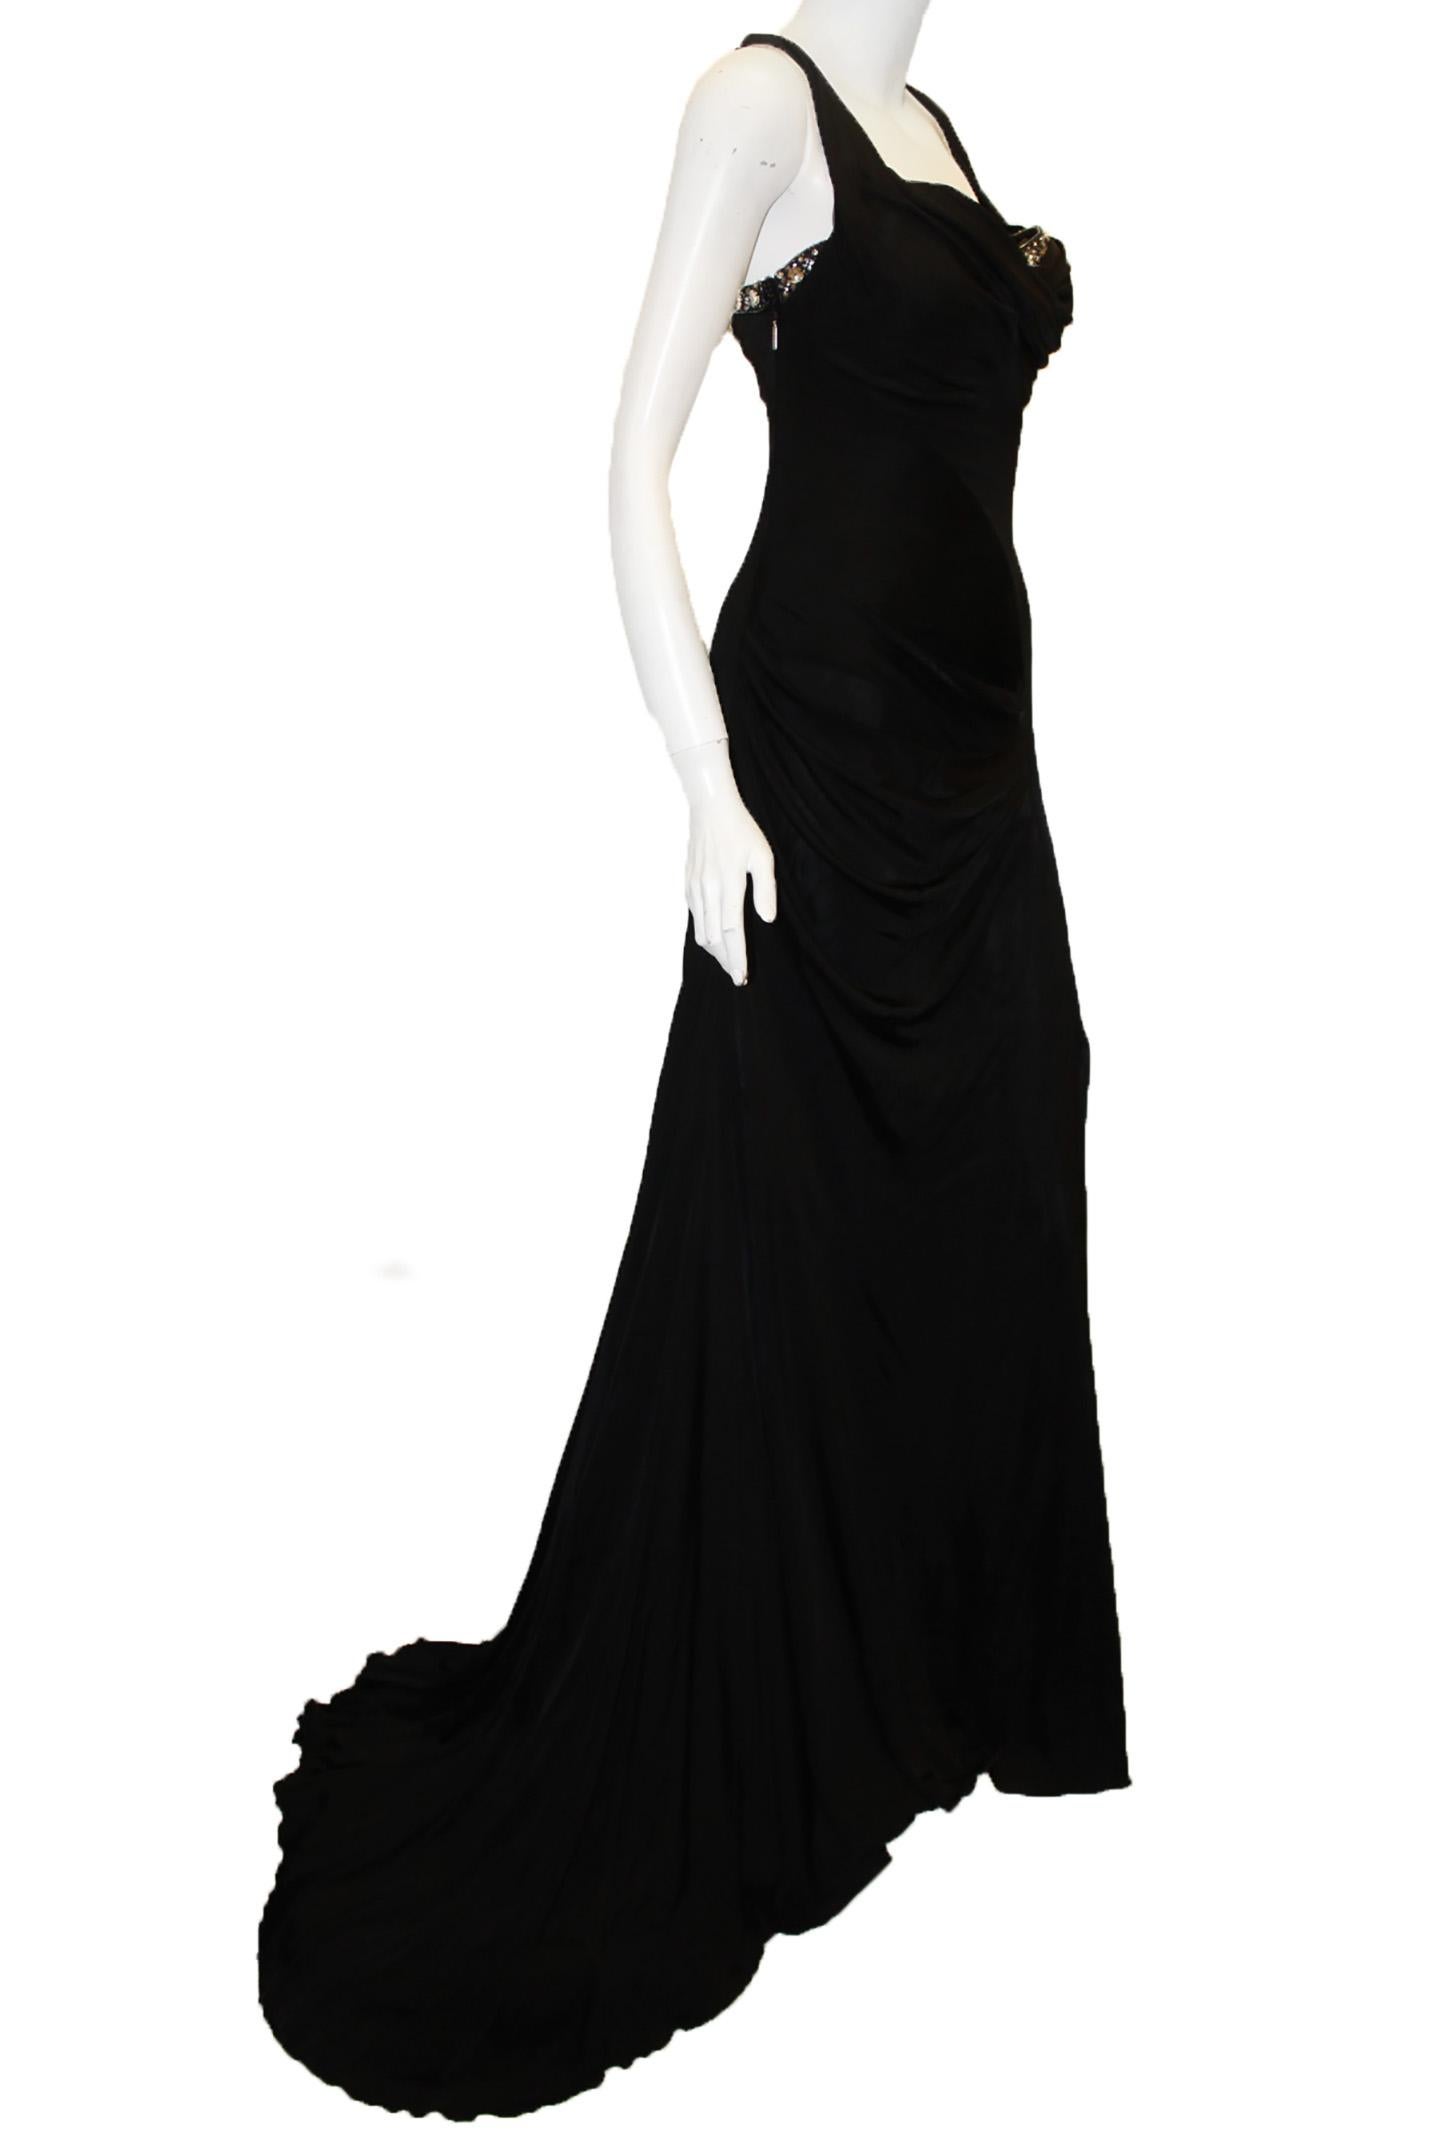 Roberto Cavalli black jersey long evening dress is embroidered with clear crystals of varying shapes around asymmetrical neckline for a dramatic statement.  With twisted knot straps and open left seam slit accentuating the drama.  This gown has a